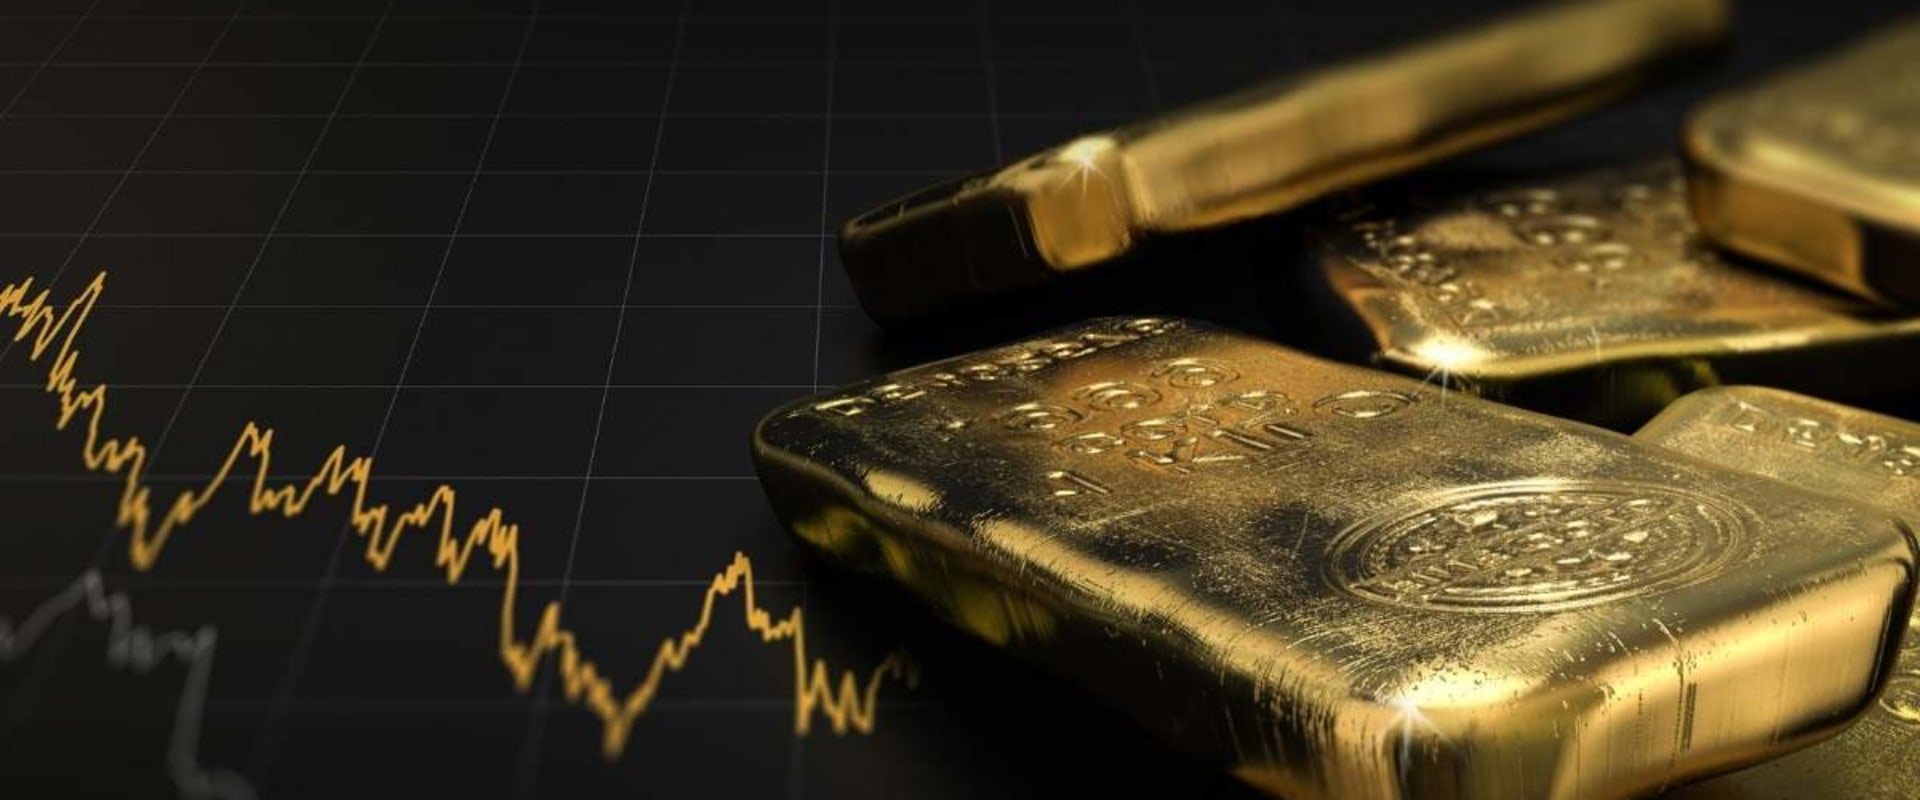 Is sbi gold etf a good investment?